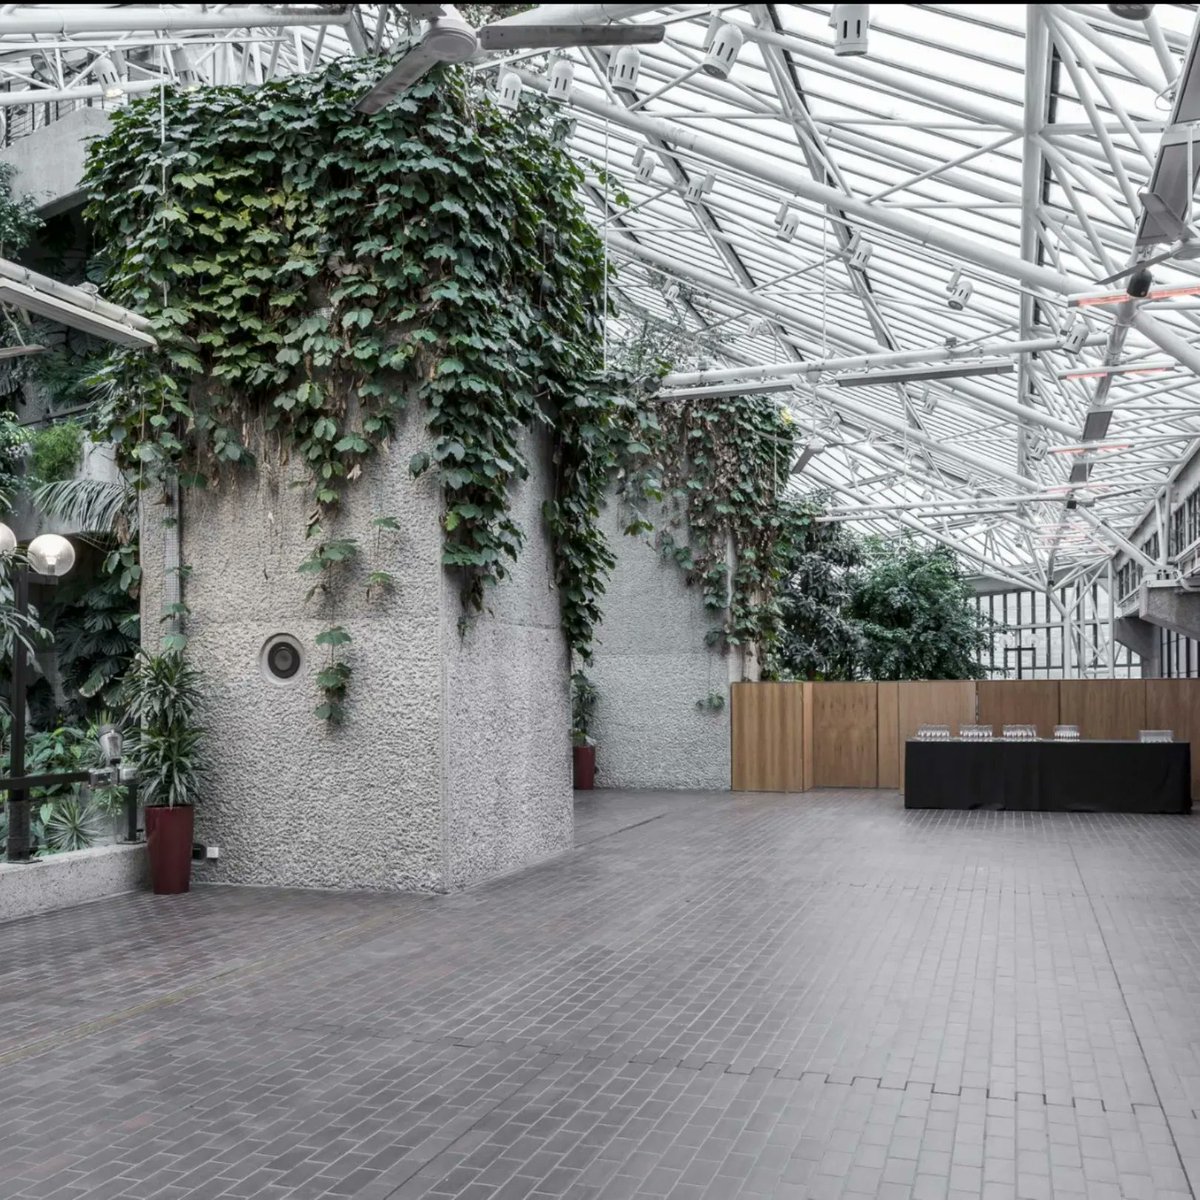 From auditoriums to a jungle escape within the conservatory, the Barbican is perfect for any summer event. We are very excited that @barbicancentre will be onboard at our next Show! Catch the Barbican team on stand B12 at the London Summer Event Show! #LSES #eventprofs